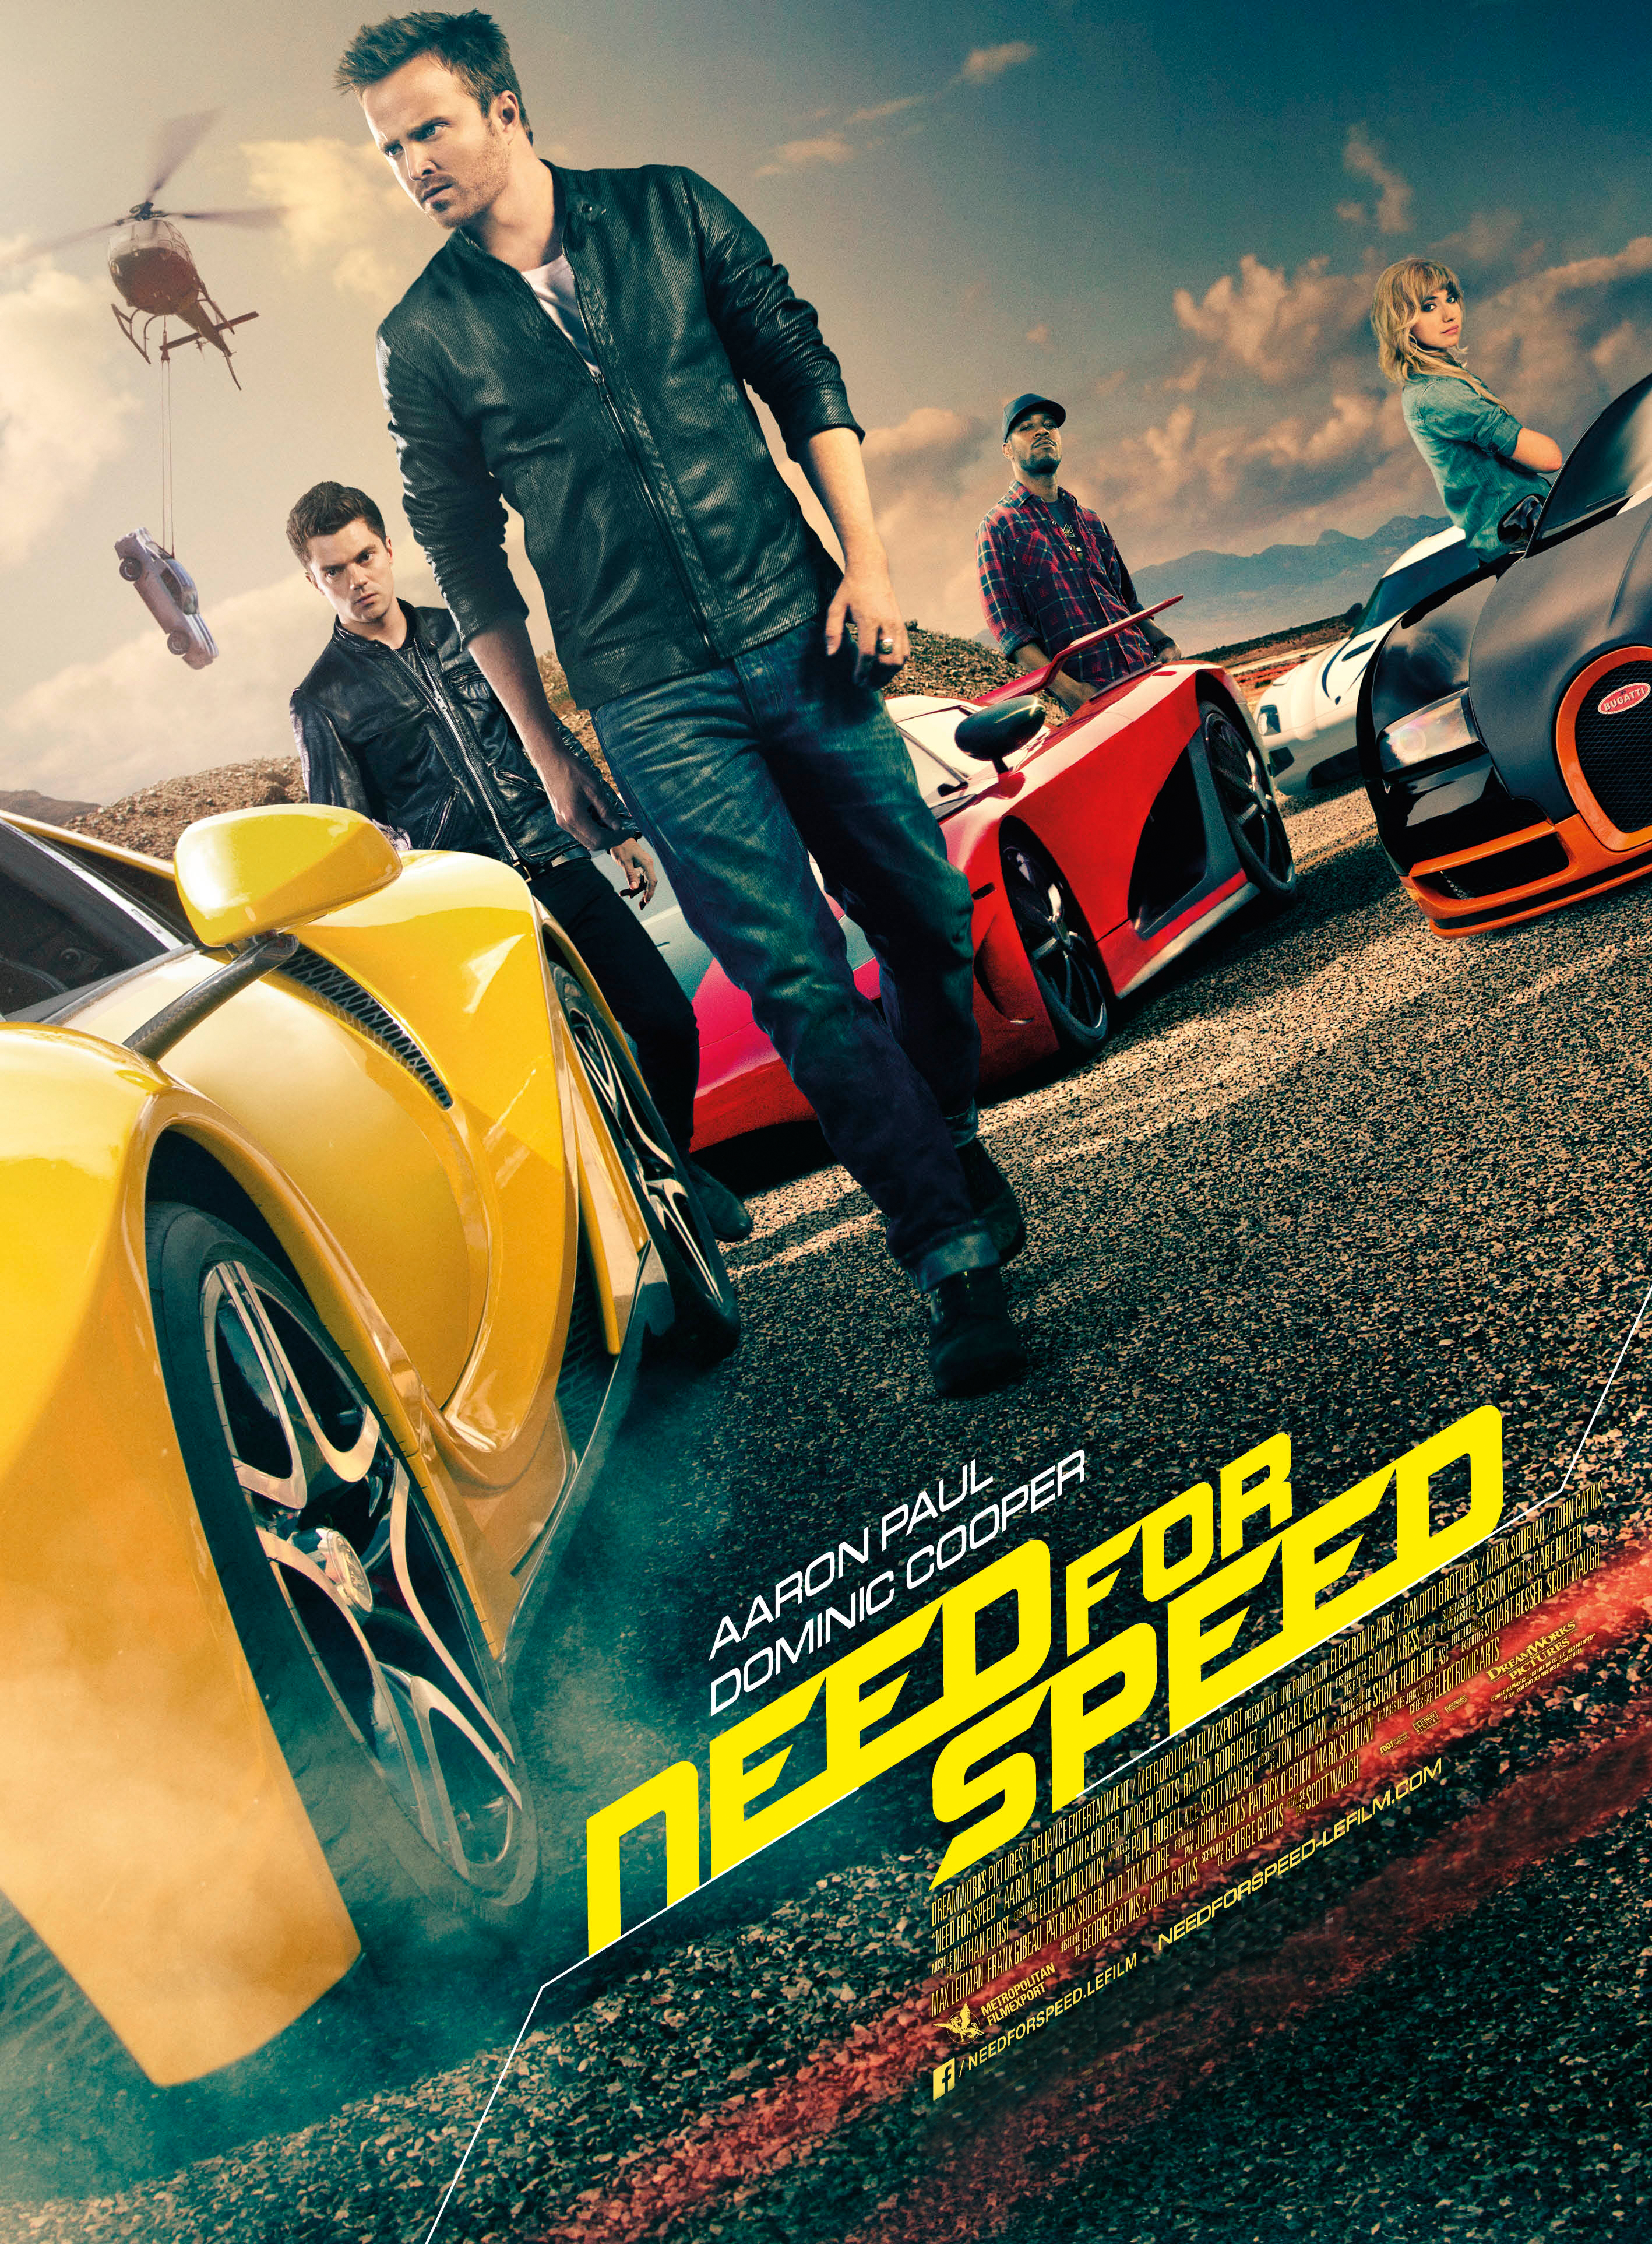 Need for Speed - Full Cast & Crew - TV Guide